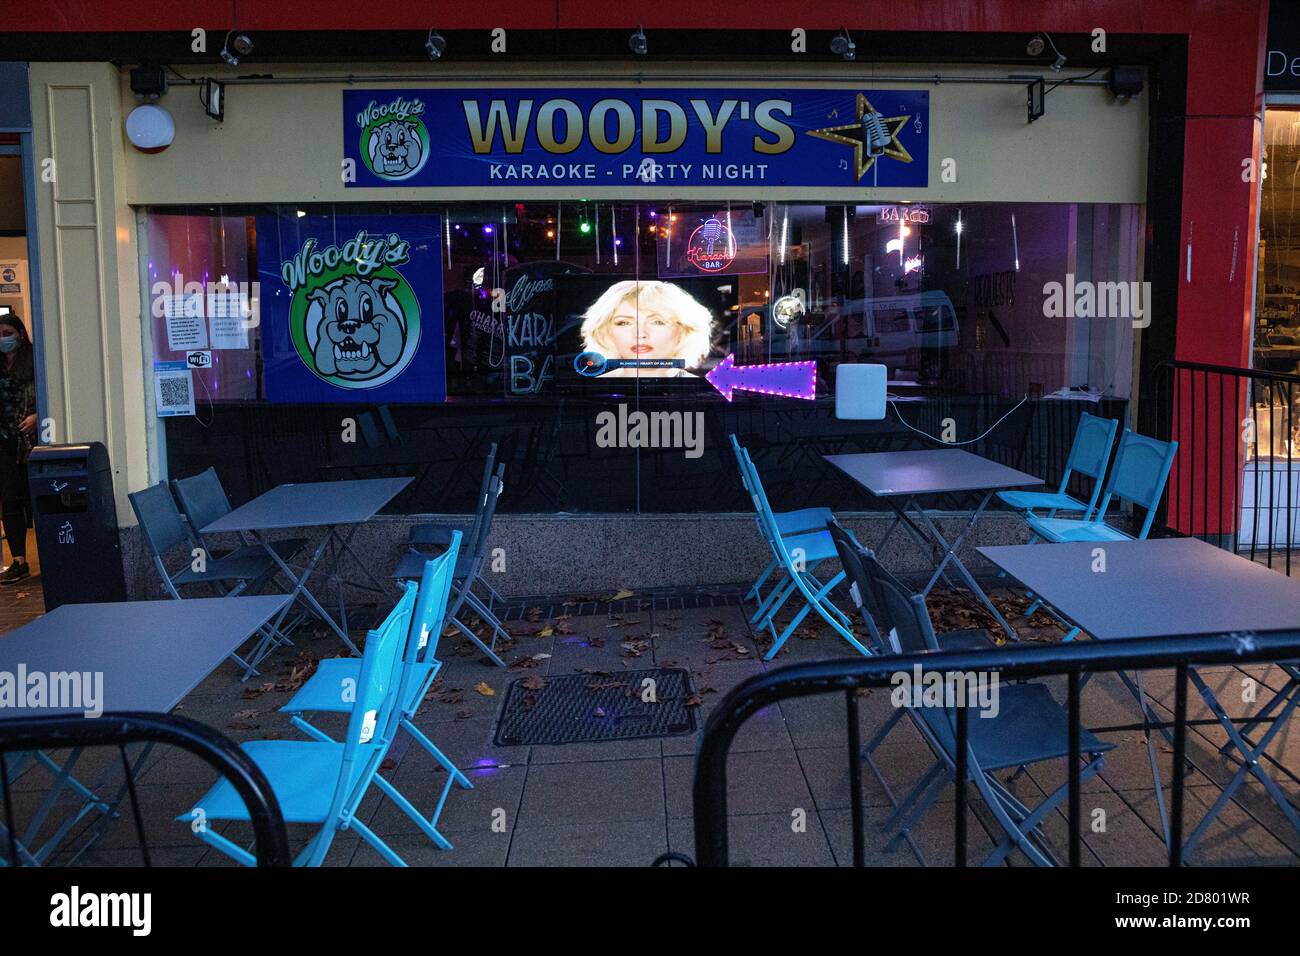 Sheffield town centre the. night it was due. to enter teir 3 restriction for covid 19. Woody’s Bar. Stock Photo